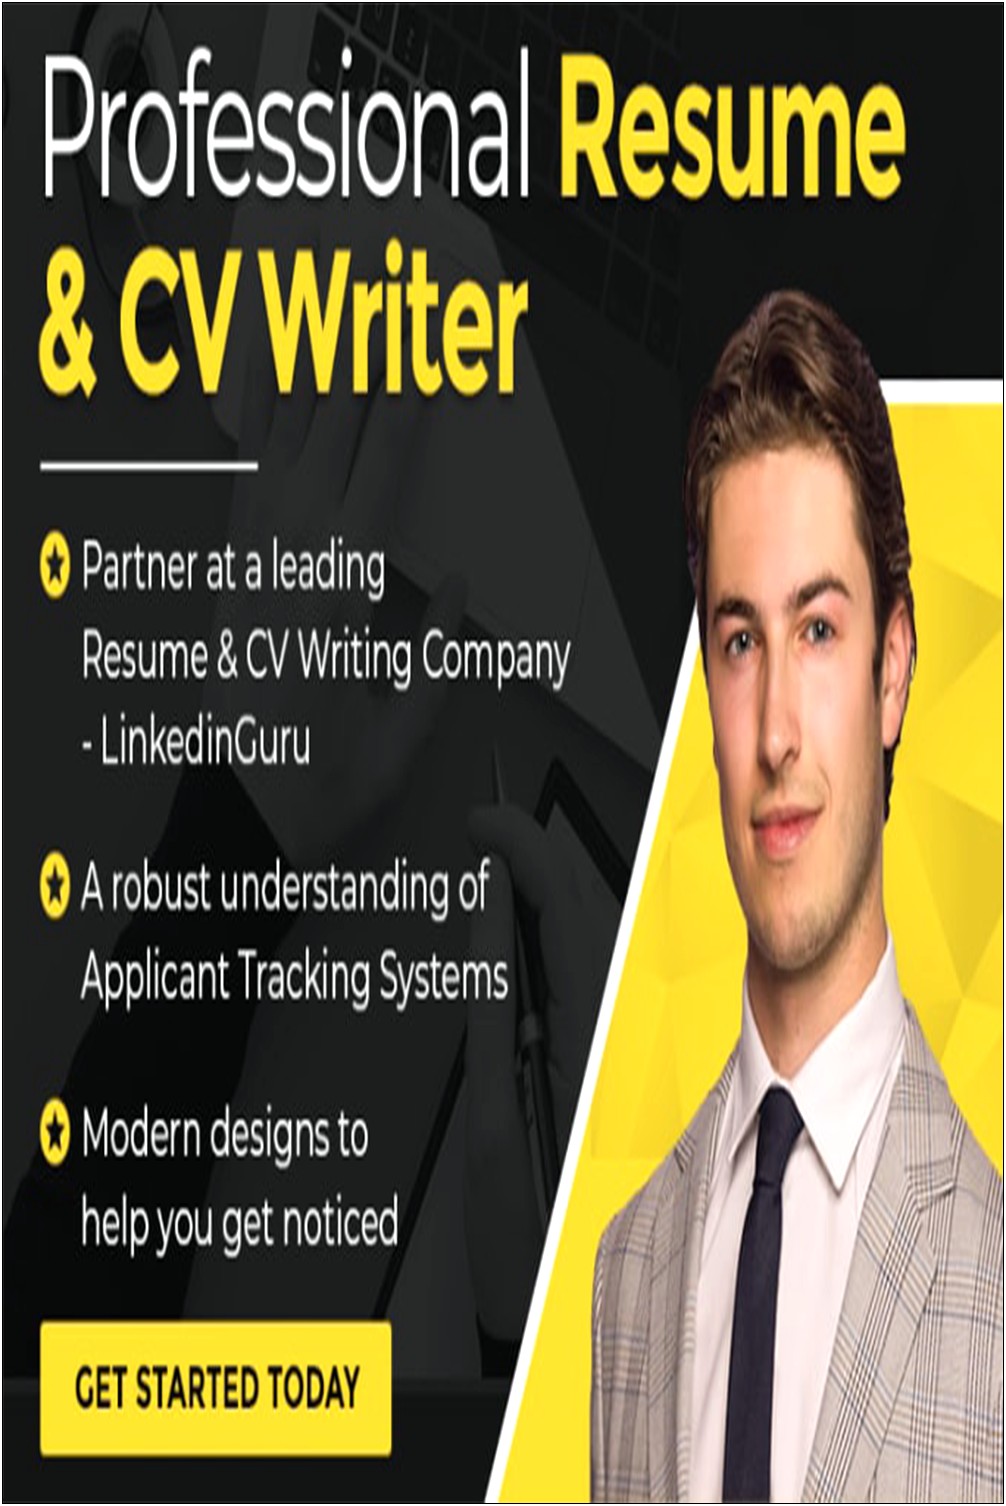 Resume Of Managing Partner In Consulting Firms